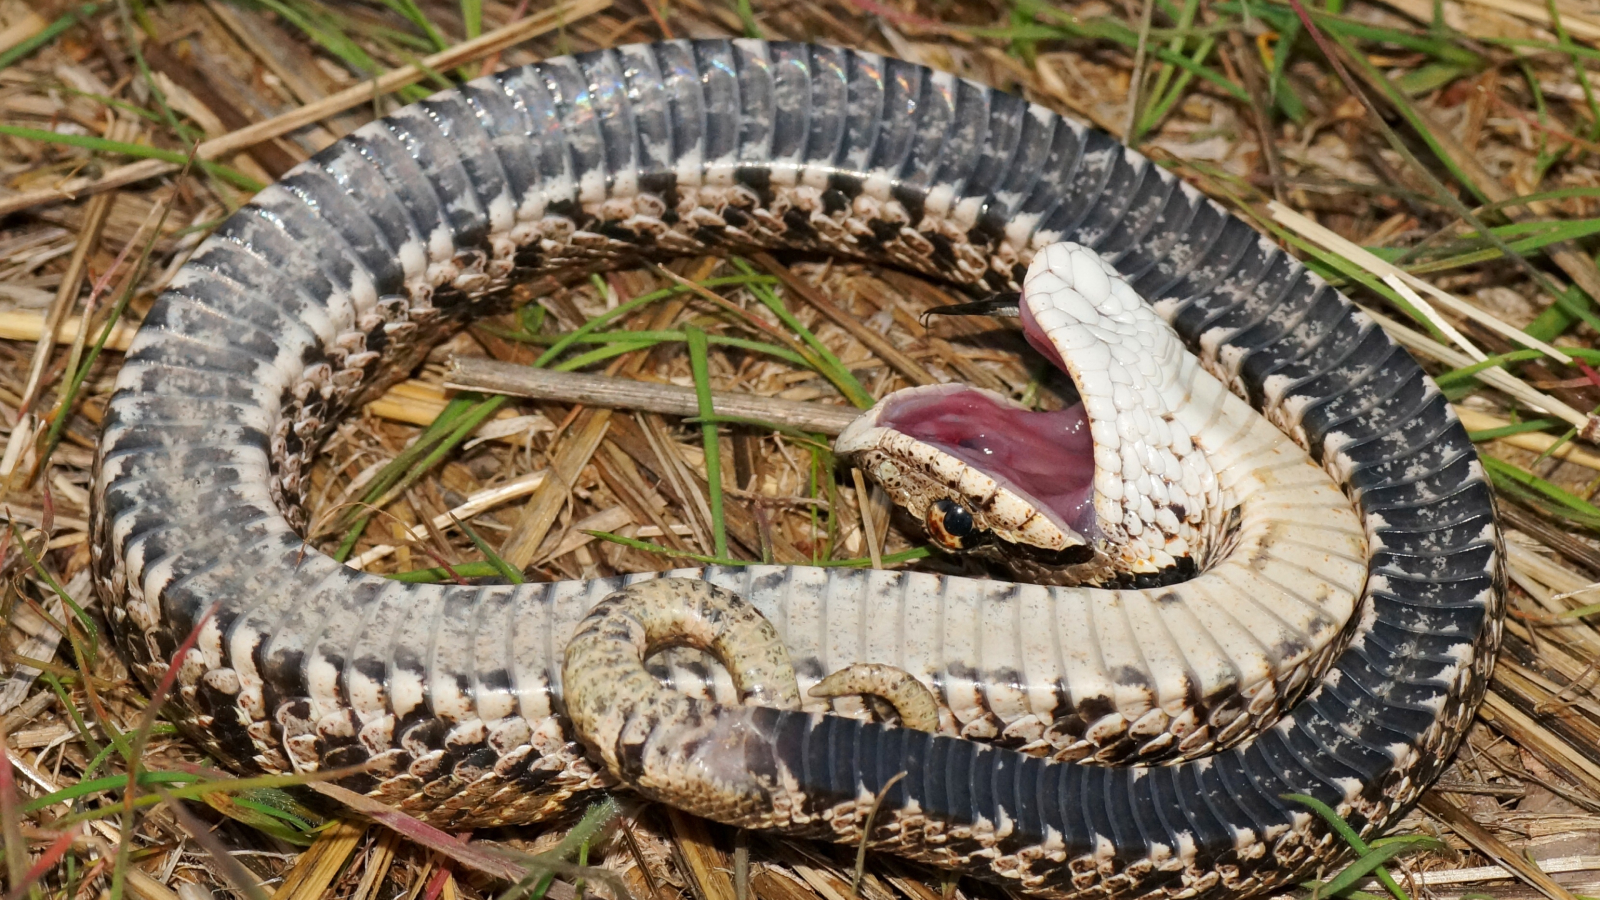 Dice snakes fake their own death, smearing themselves with blood and poop to make the performance extra convincing